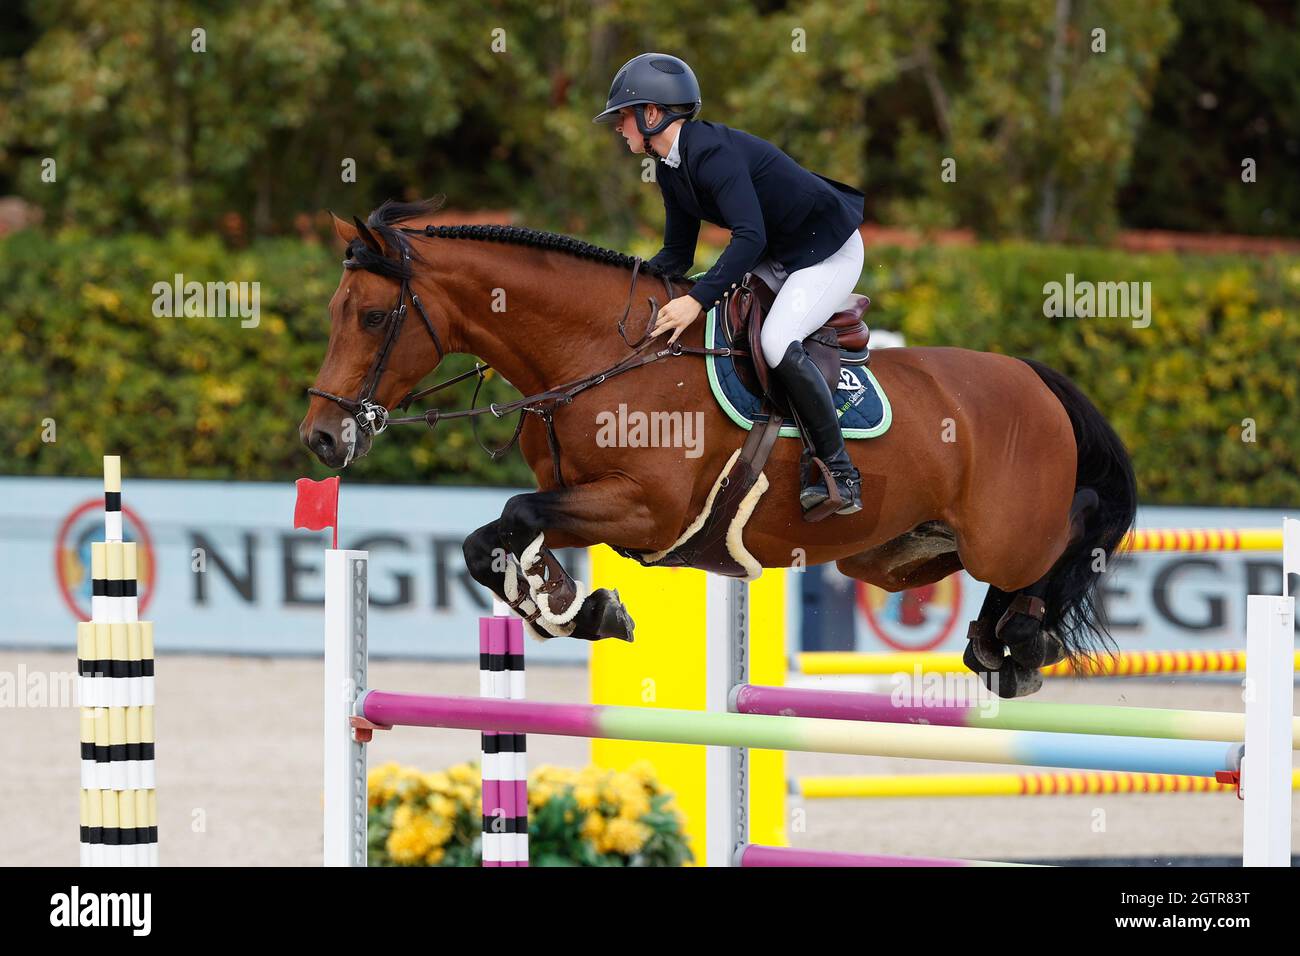 Sanne Thijssen of Nederland riding Hi There during the CSIO Barcelona: Longines FEI jumping Nations Cup at Real Club de Polo of Barcelona. Stock Photo